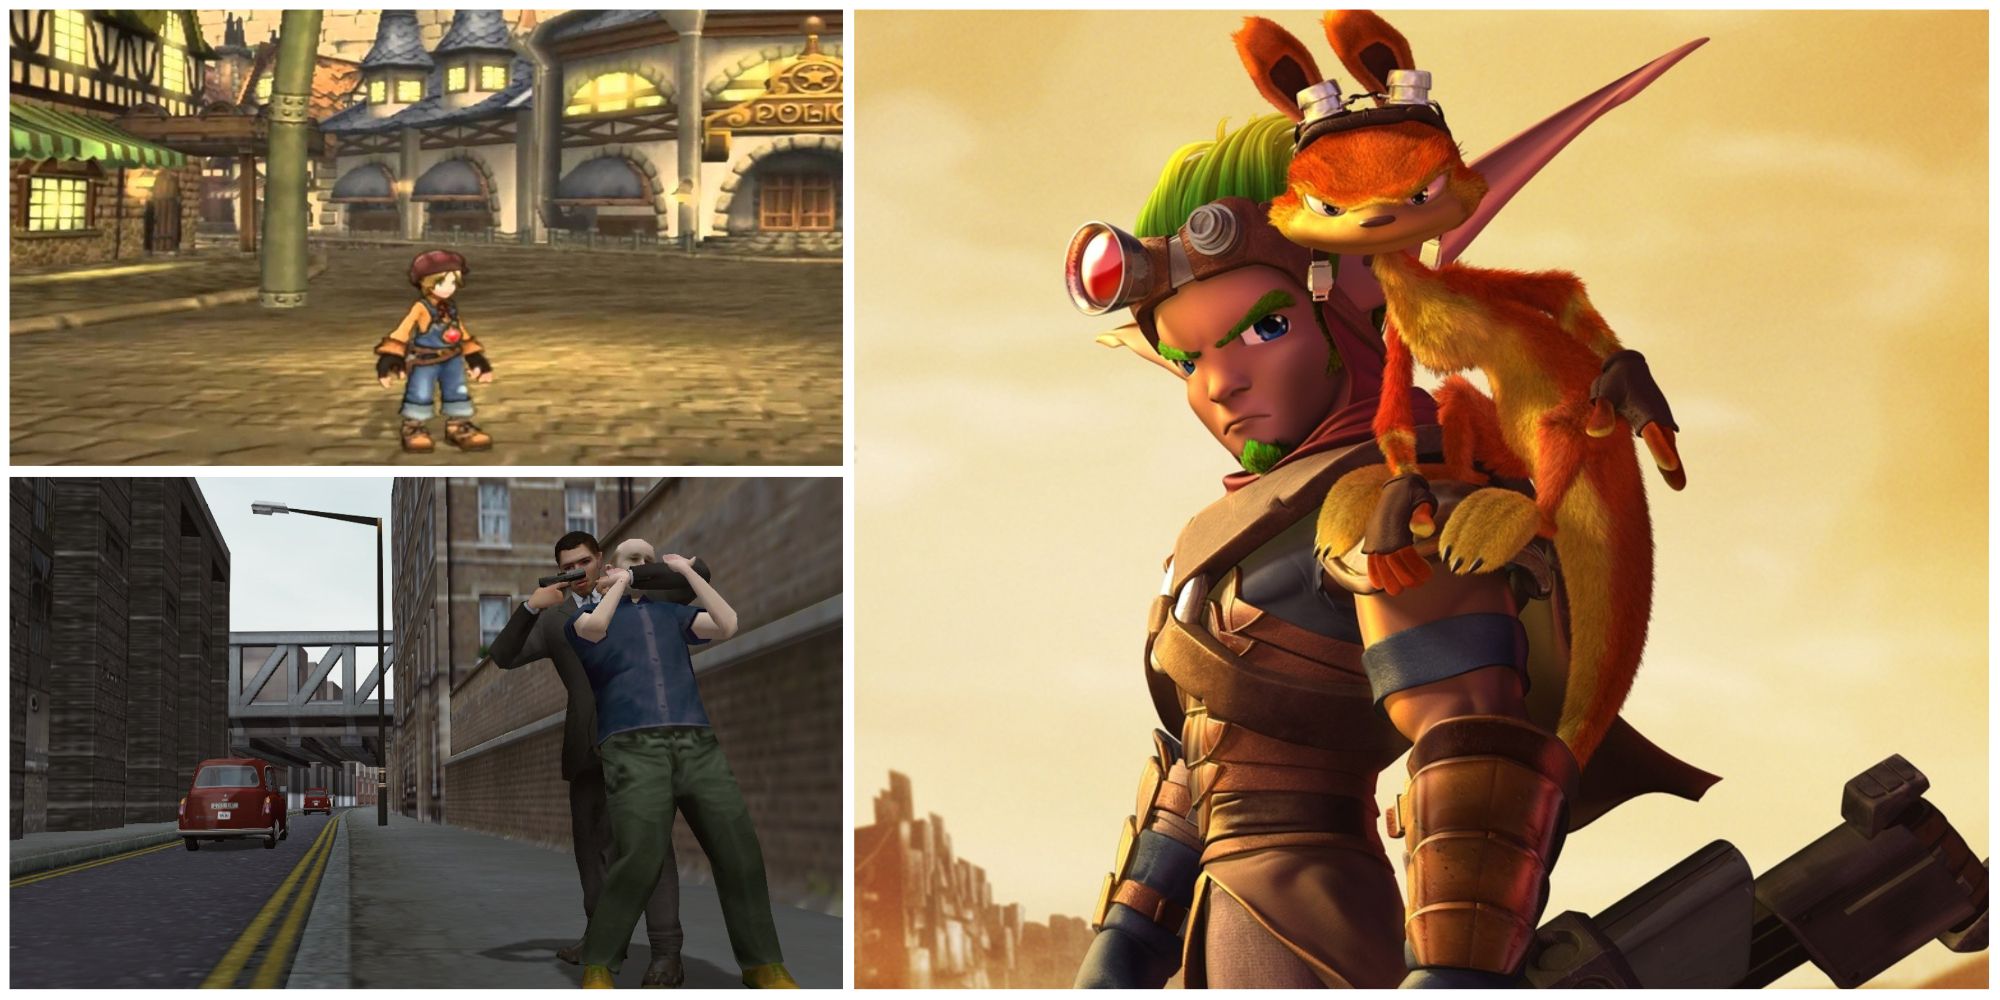 dark cloud 2 maximilian, the getaway fight, jak and daxter characters featured